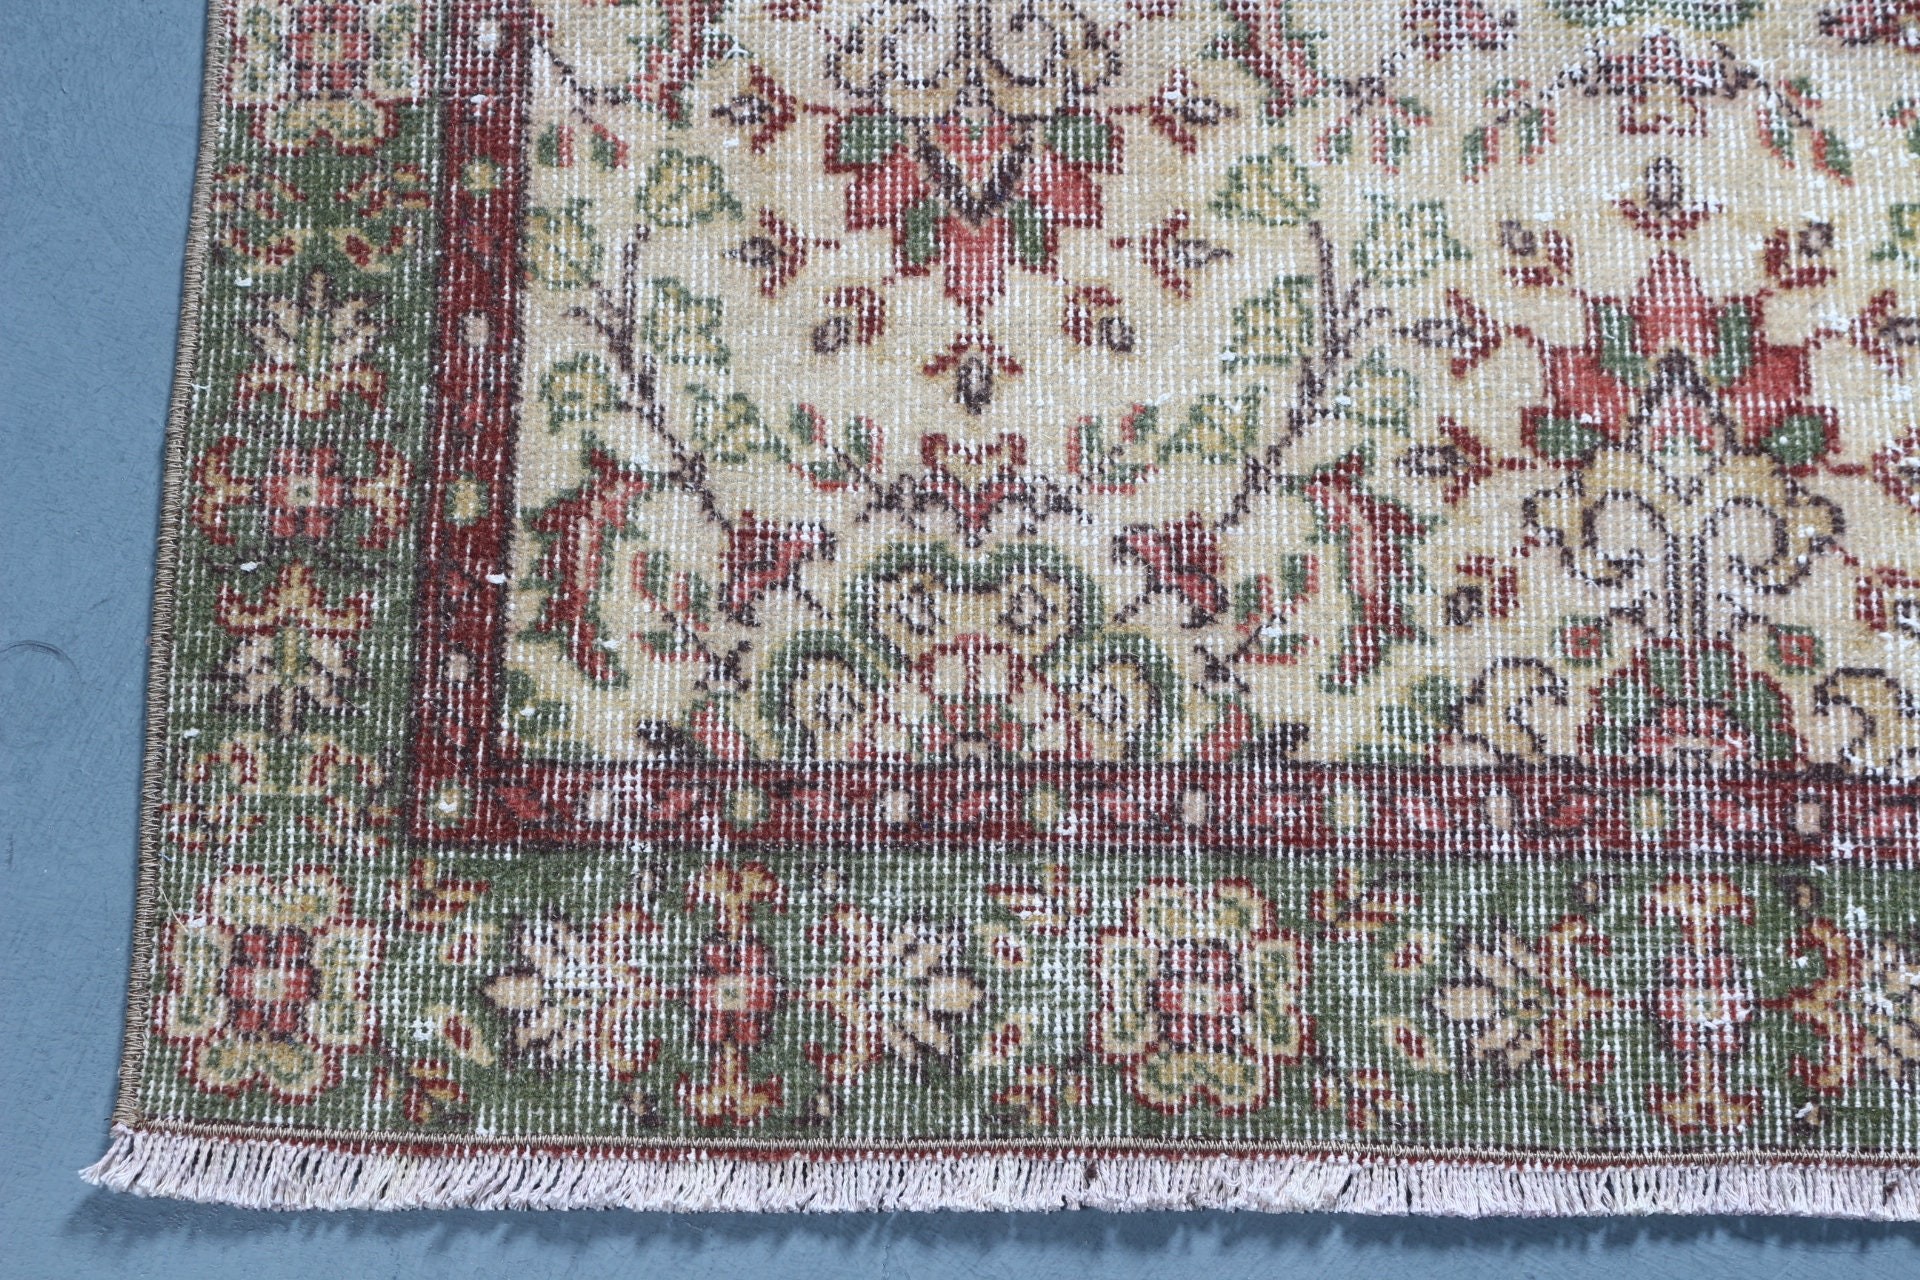 Turkish Rug, Vintage Rug, Entry Rugs, Kitchen Rug, Rugs for Kitchen, 3.5x6.6 ft Accent Rug, Home Decor Rugs, Bedroom Rugs, Beige Wool Rug